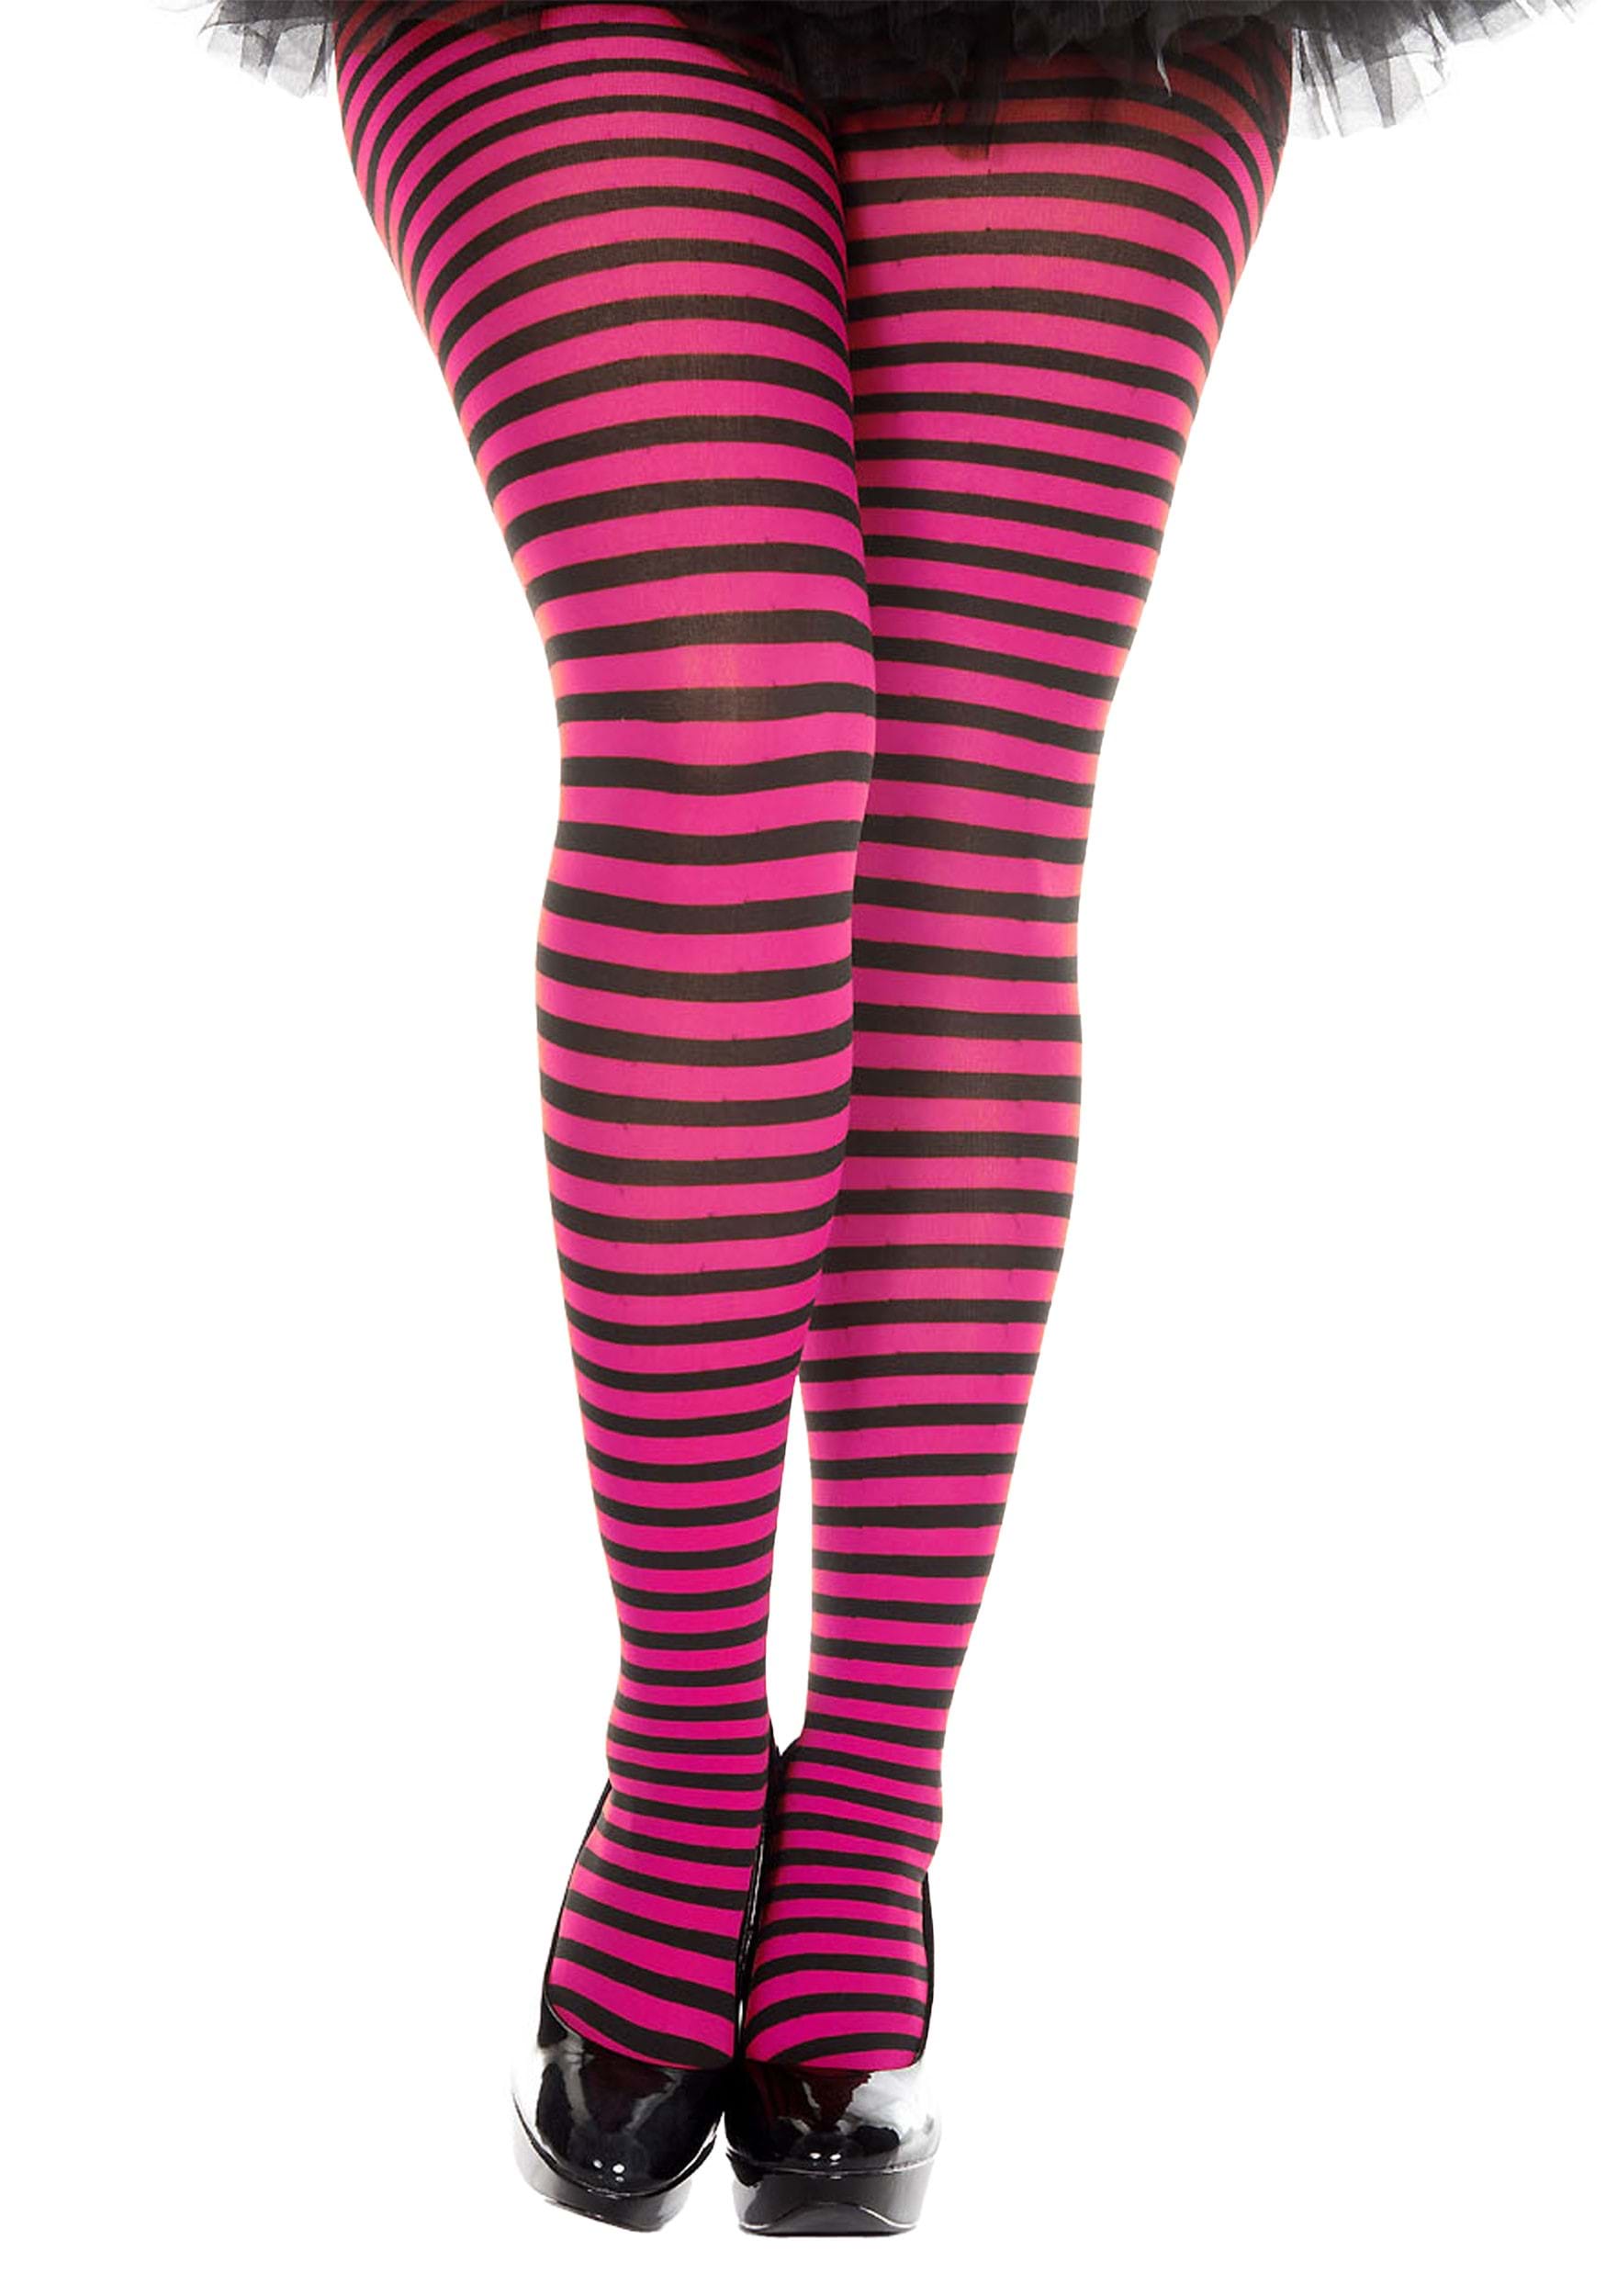 Adult Semi-Opaque Seamless Tights, Purple/Black Striped, Plus Size,  Wearable Costume Accessory for Halloween